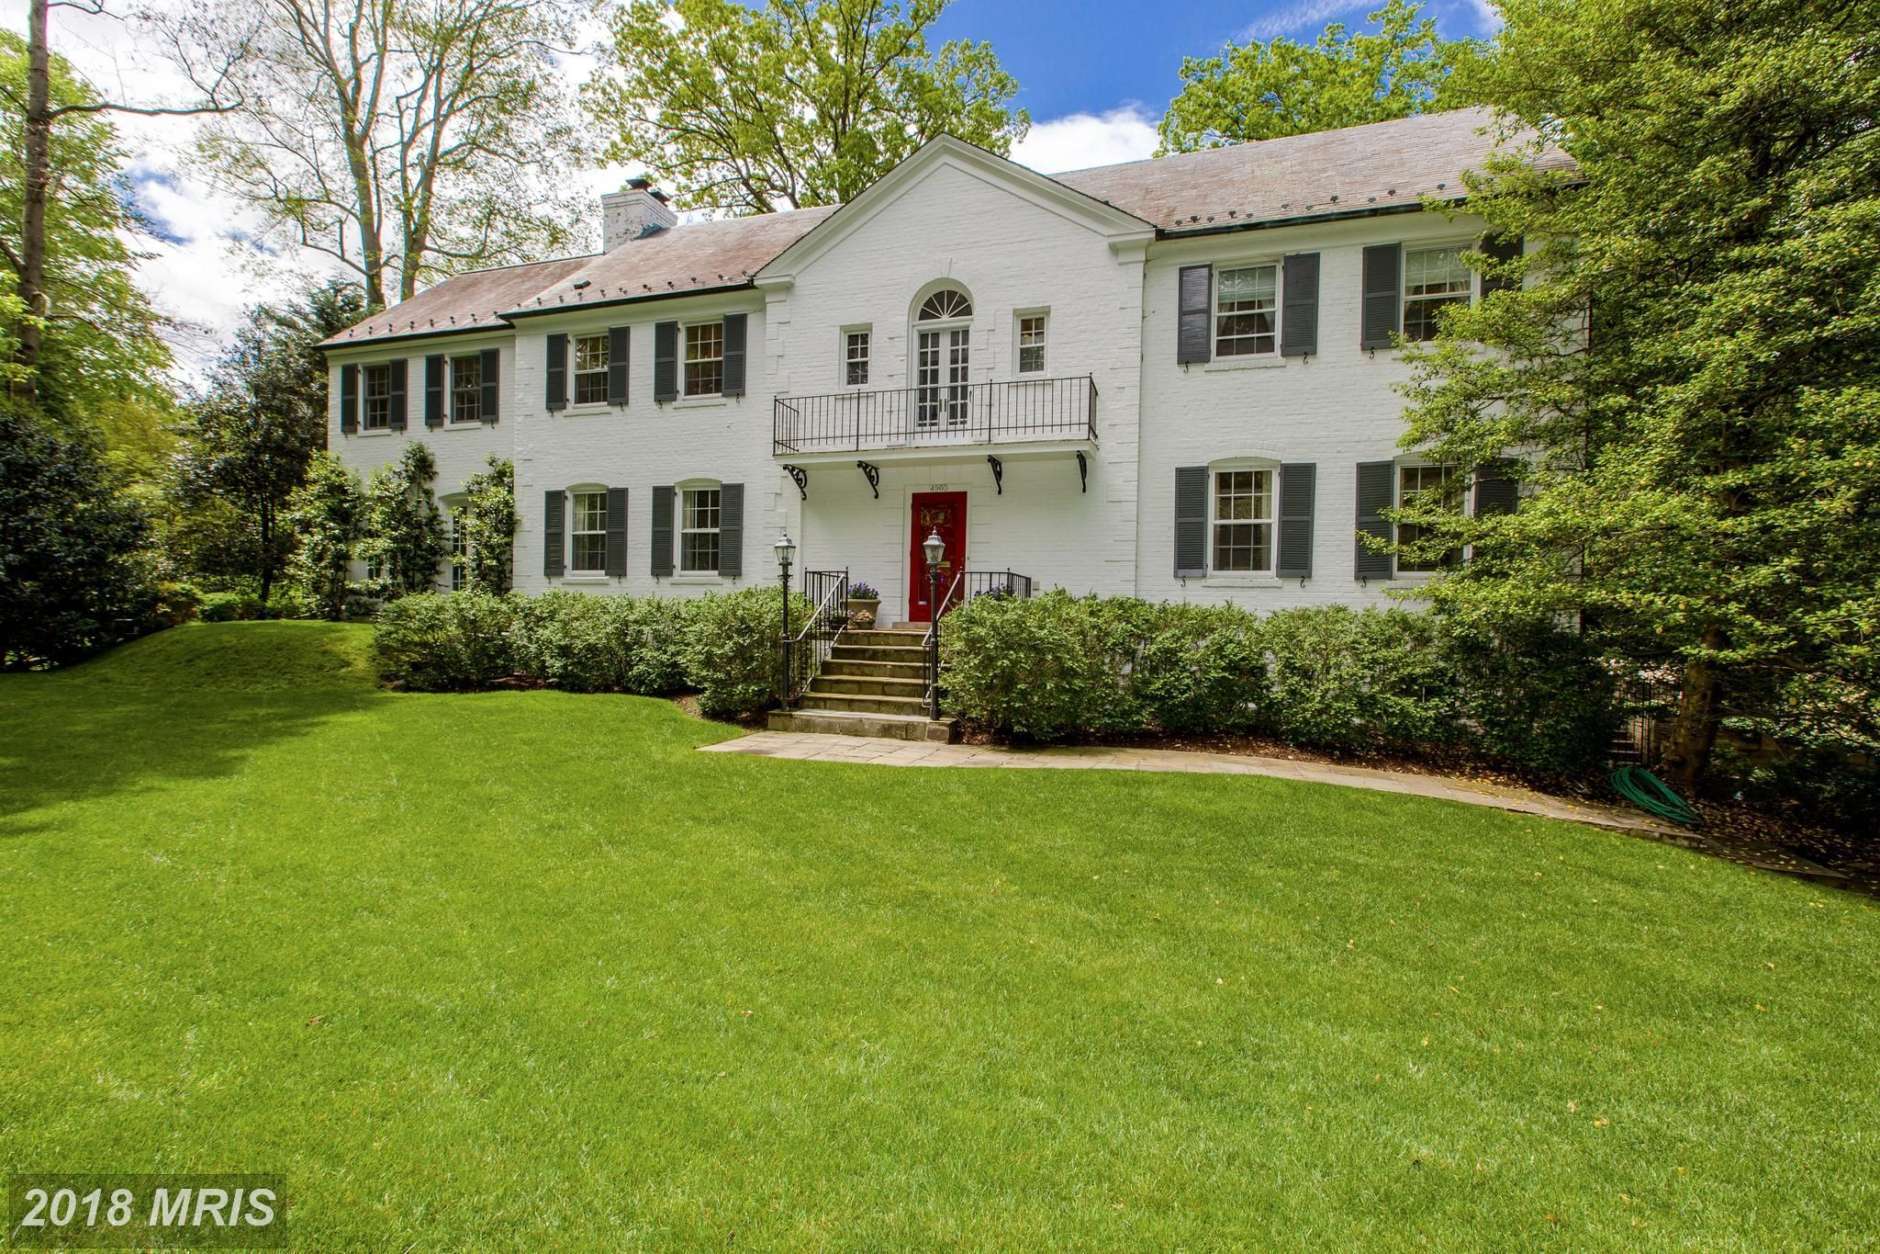 5. $3,260,000

4960 Rockwood Parkway Northwest
Washington, D.C.

Built in 1950, this traditional-style house includes five bathrooms and six bedrooms. (Courtesy Bright MLS)